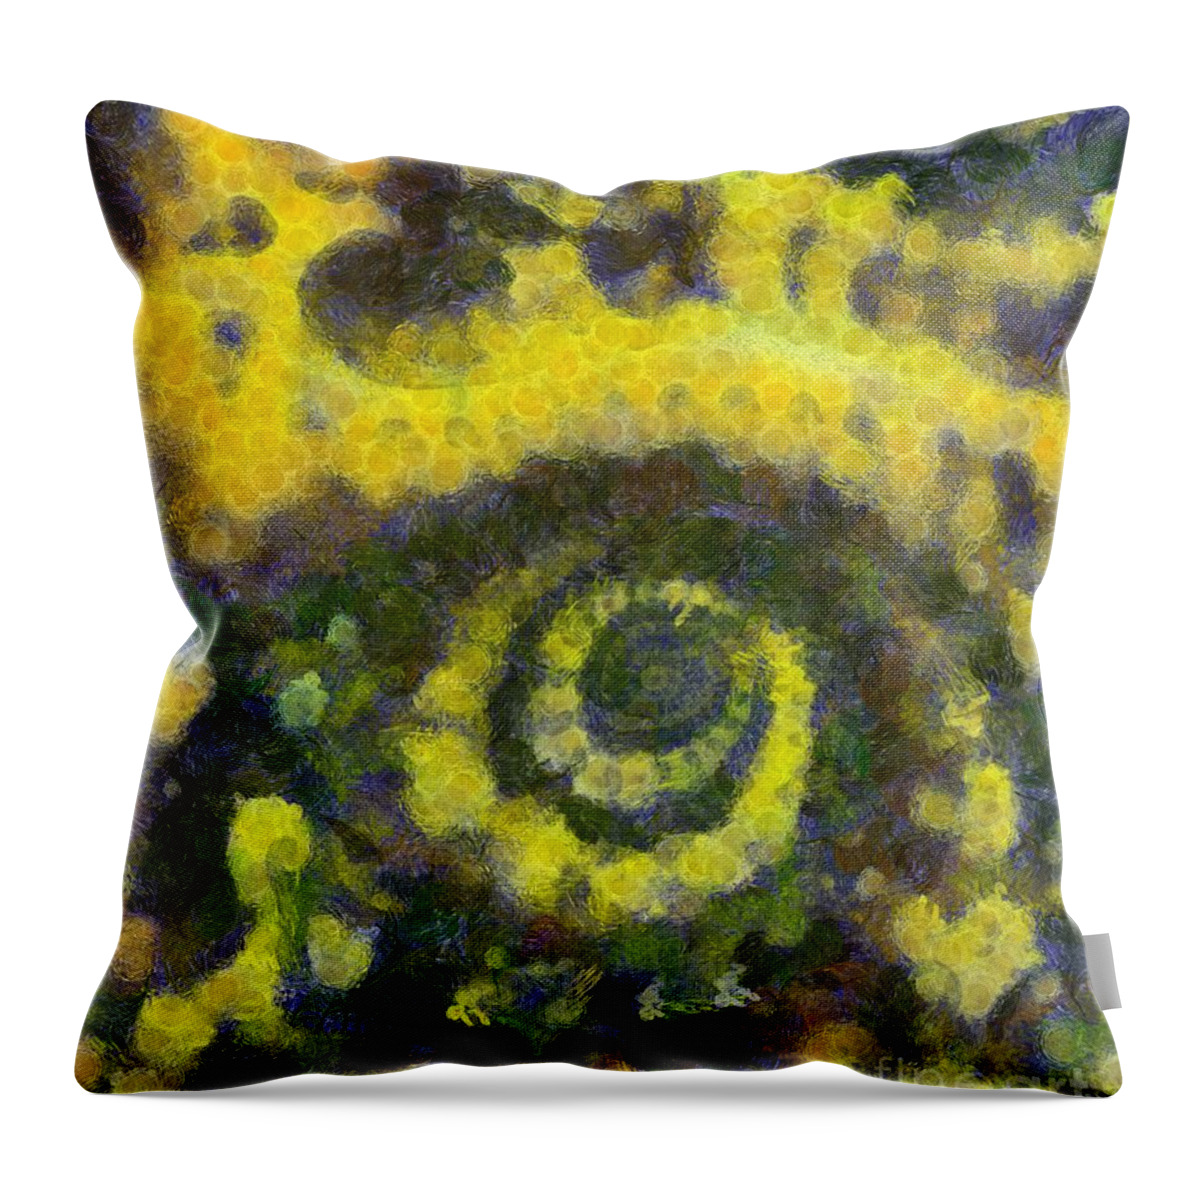 Painting Throw Pillow featuring the painting Abstract Art by Tito. Sunflower by Esoterica Art Agency